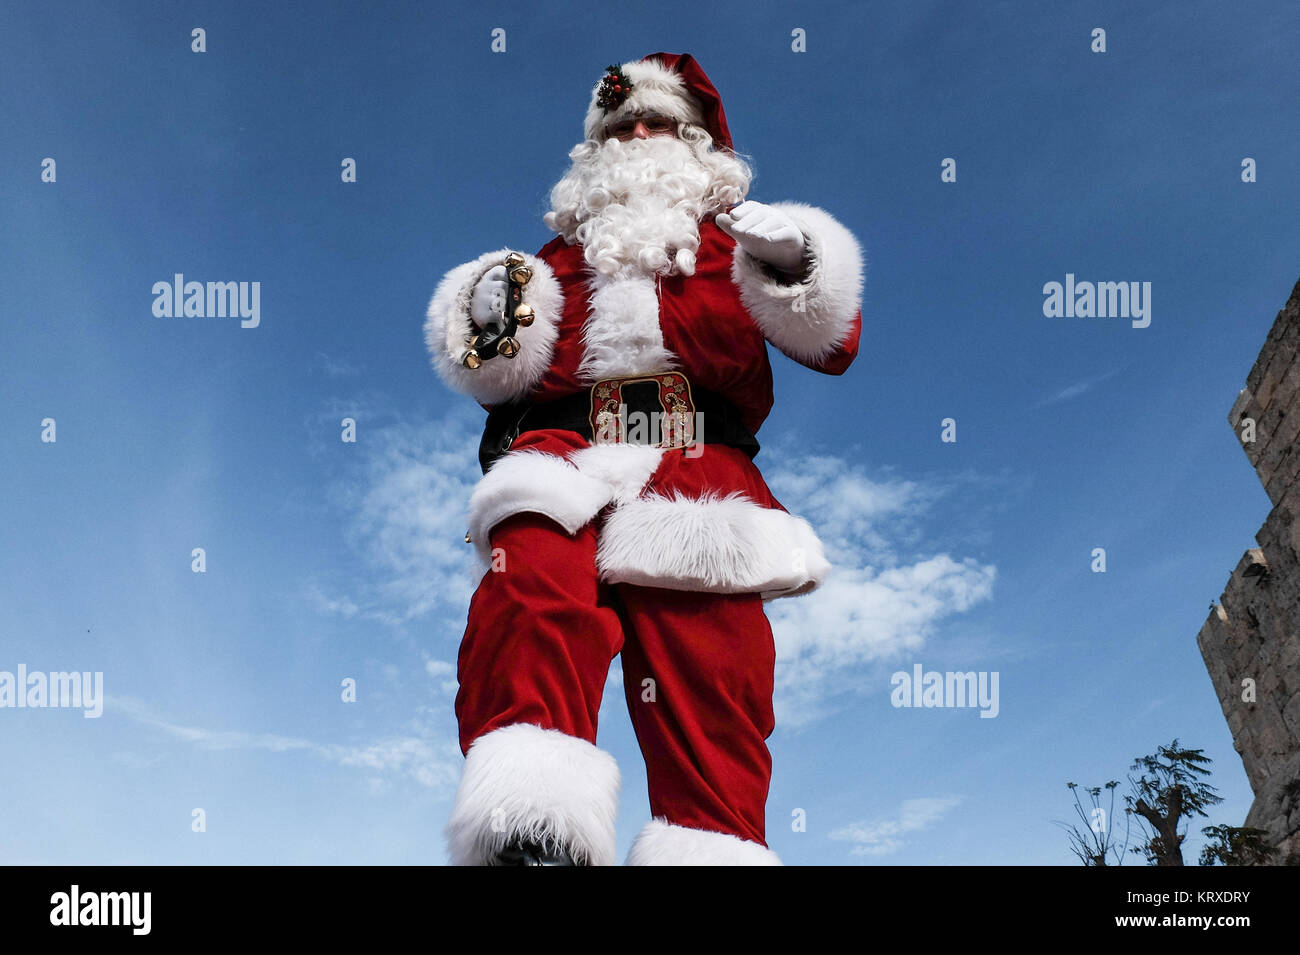 Jerusalem, Israel. 21st December, 2017. Santa Claus, or 'Baba Noel' as he is called in Arabic, walks on the Old City walls overlooking Jerusalem. The Jerusalem Municipality and the Jewish National Fund distributed specially grown Arizona Cypress Christmas trees to the Christian population at the Jaffa Gate. Credit: Nir Alon/Alamy Live News Stock Photo